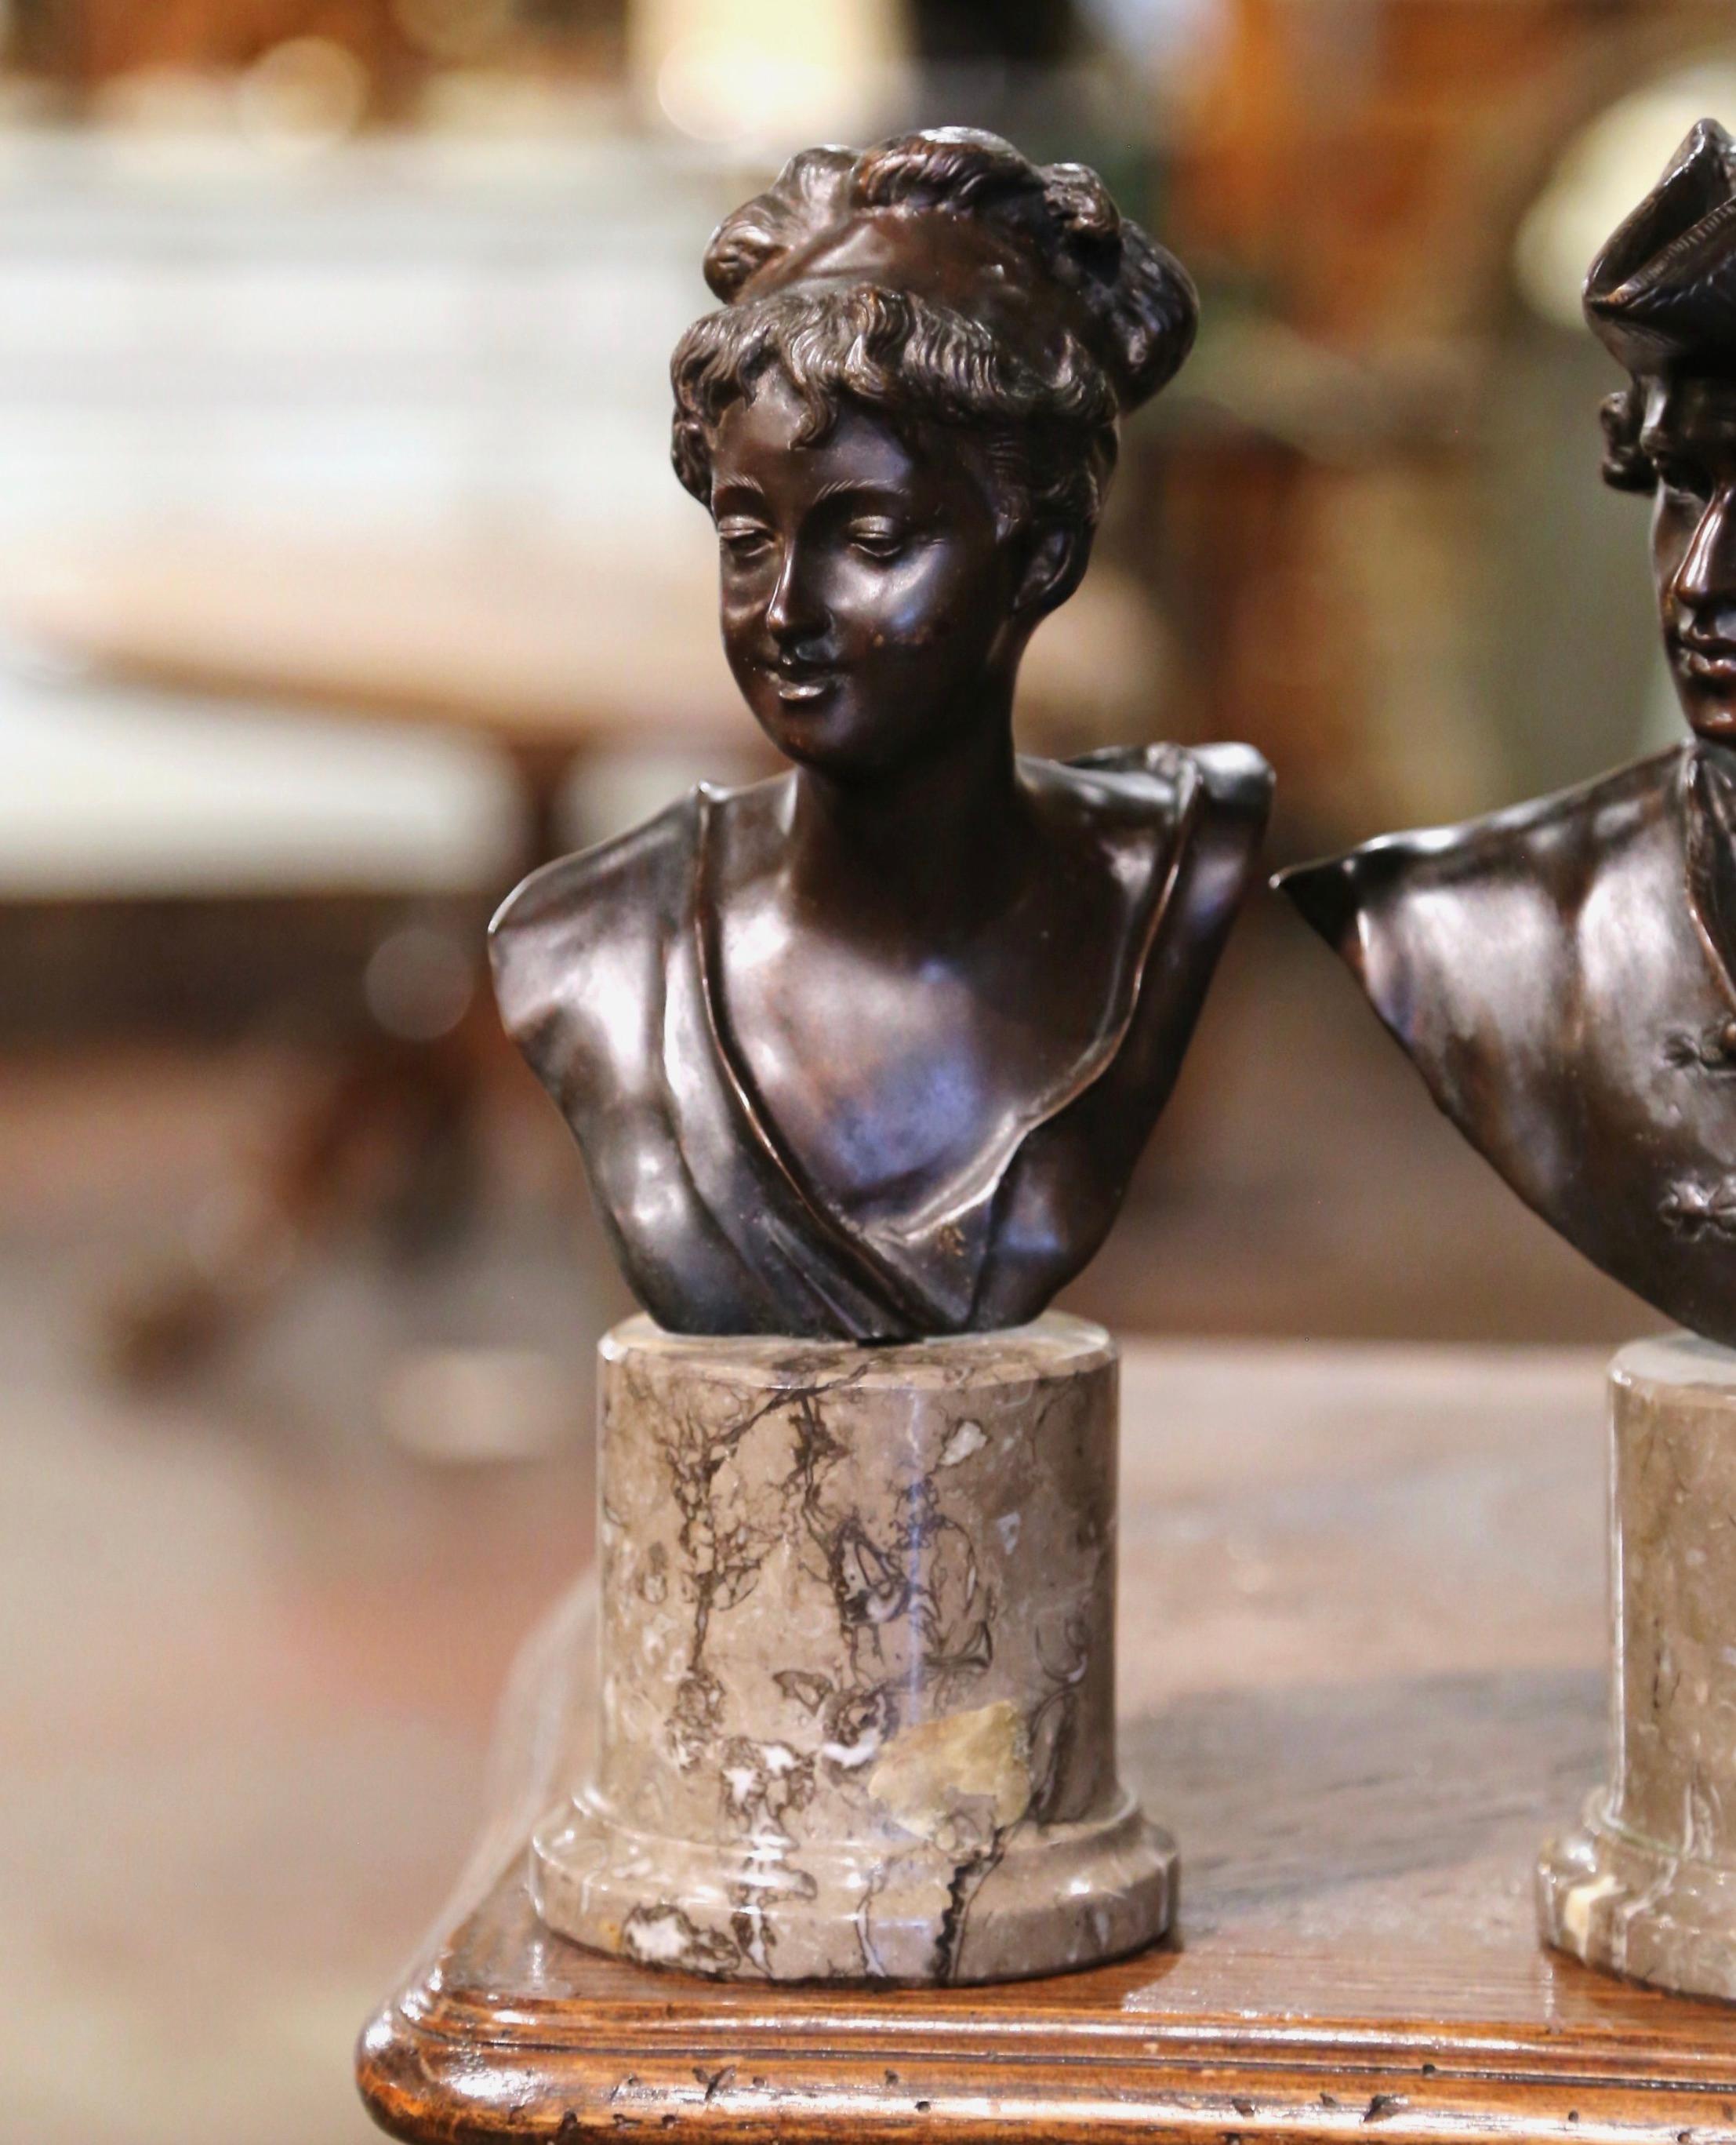 Decorate an office shelf with this elegant pair of antique busts. Crafted in France circa 1950, both subject stand on a circular marble base and depict a Royalty couple in traditional accoutrements. Each bronze figure has wonderful facial